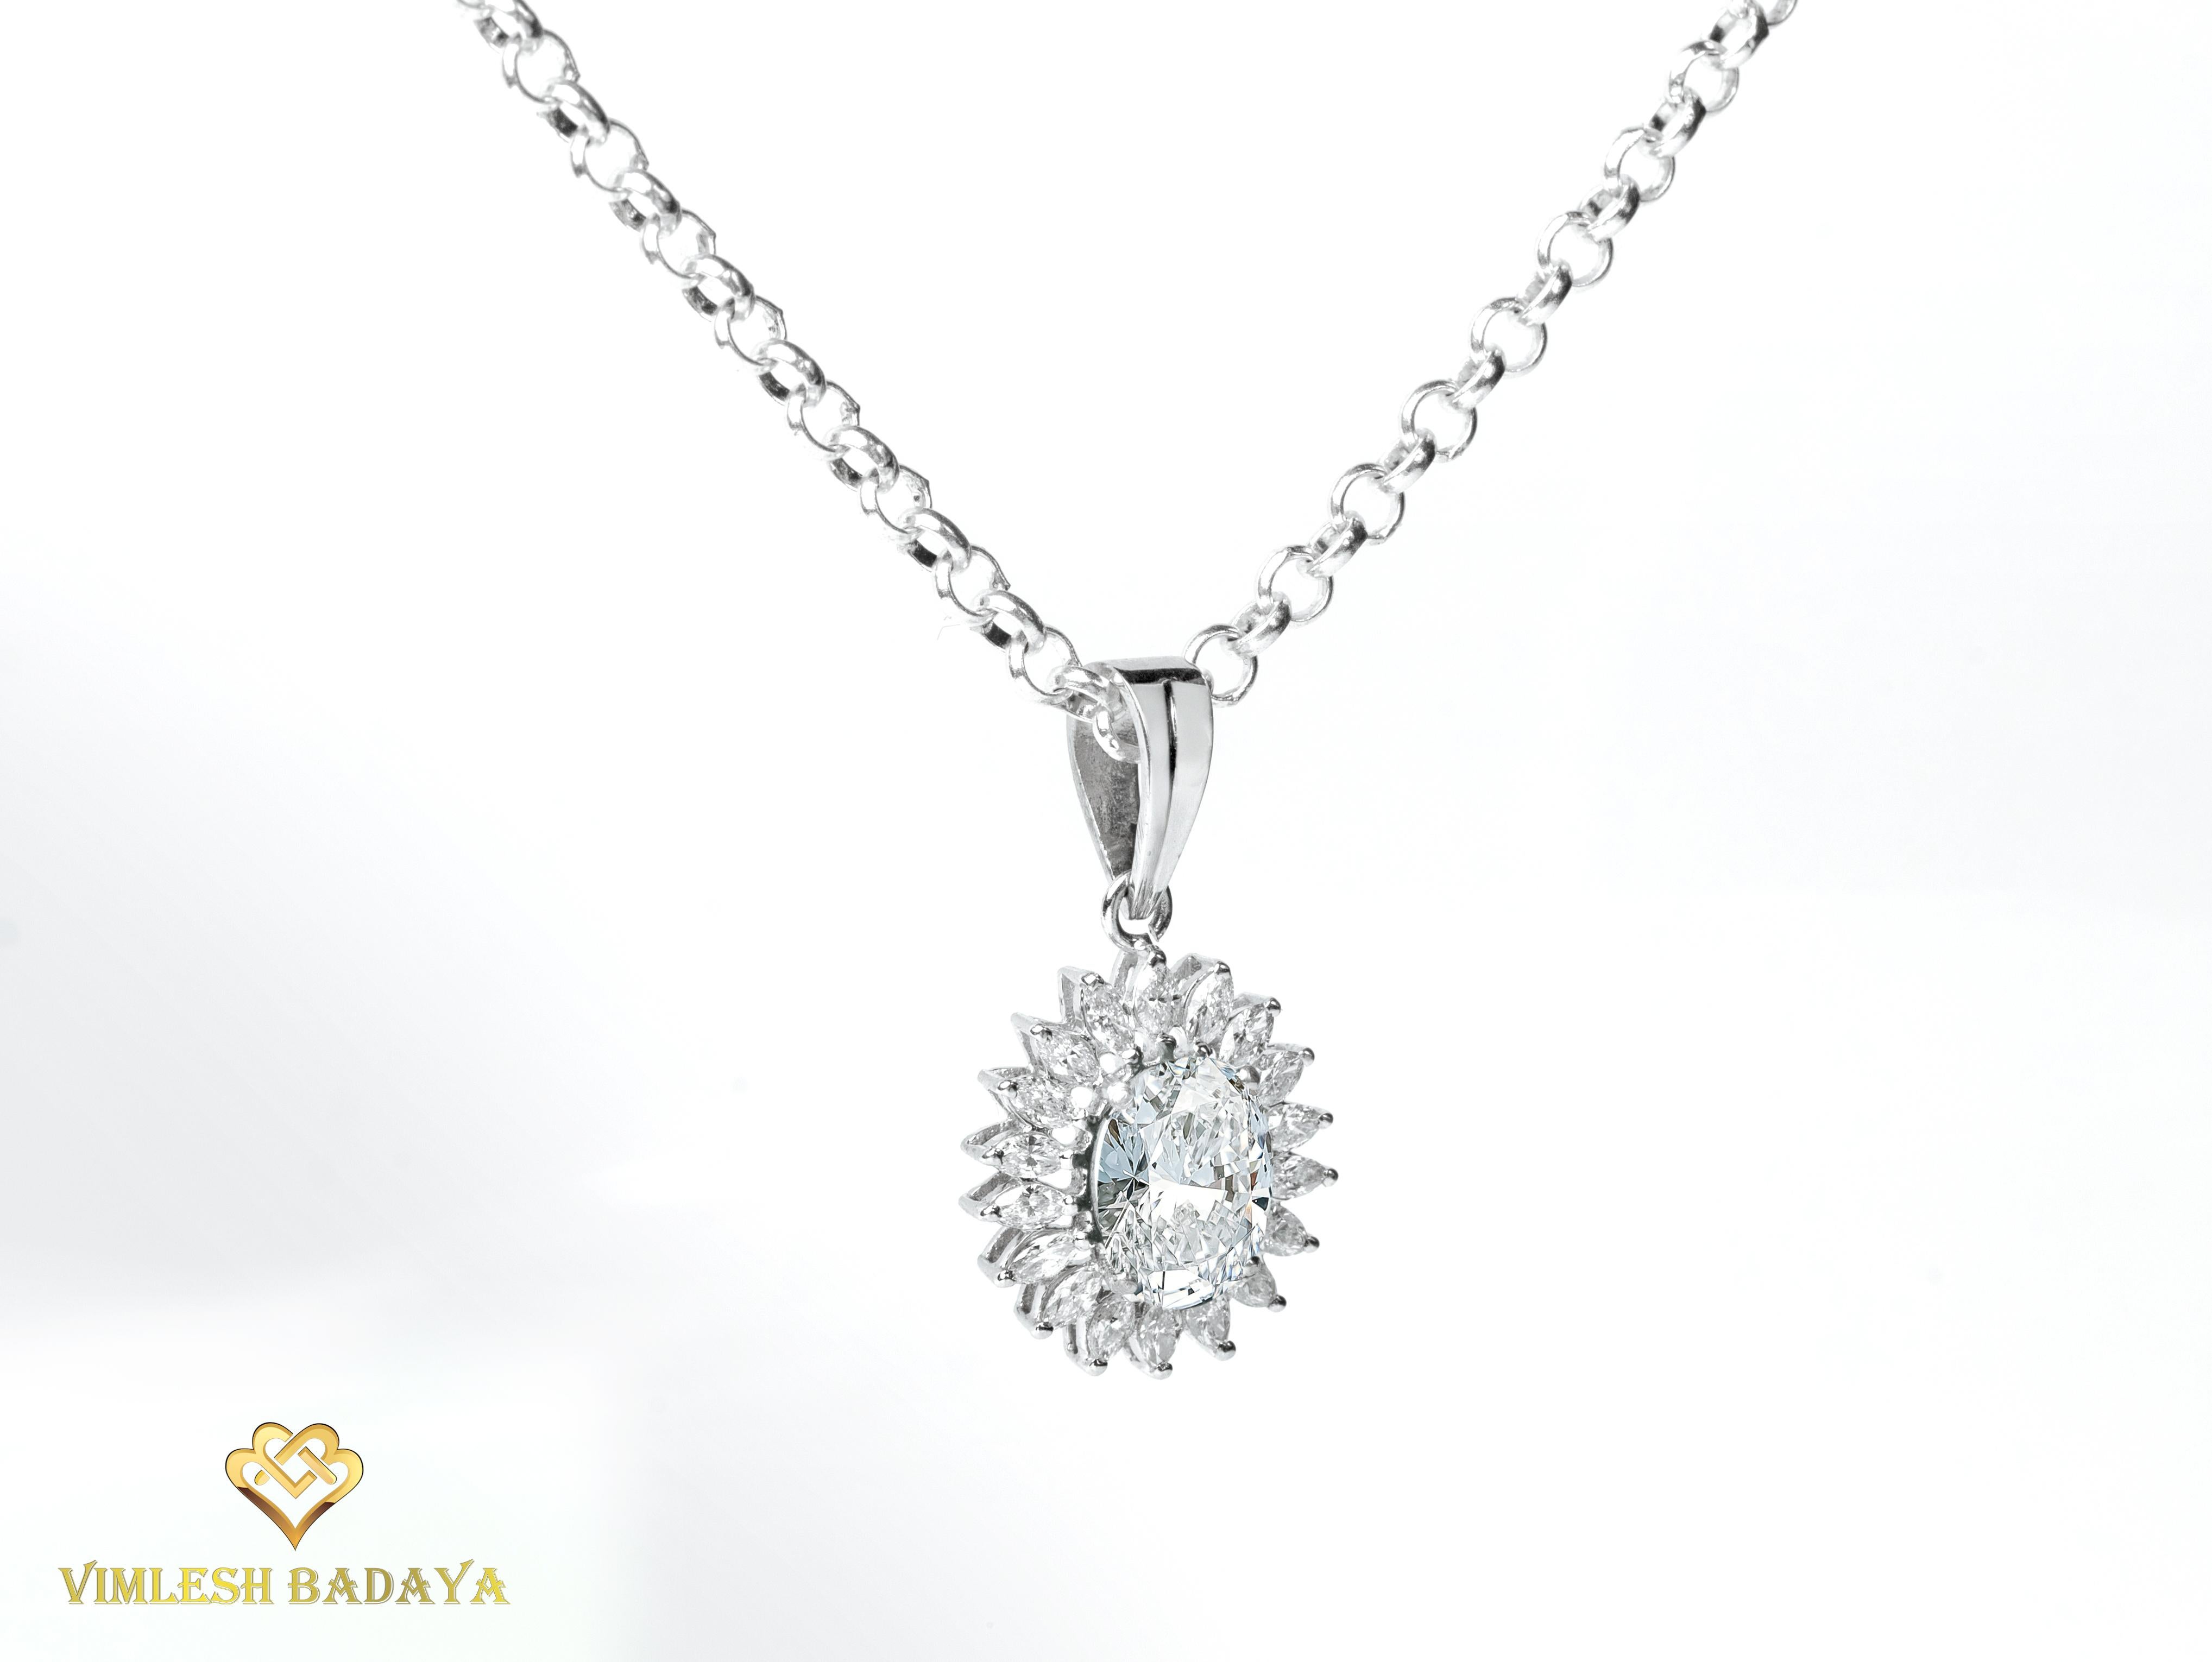 GIA Report Certified 2 Carat H Colorless VS Oval Cut Diamond Halo Pendant

Available in 18k White gold.

Same design can be made also with other custom gemstones per request.

Product details:

- Solid gold

- Main stone - approx. 2 carat GIA